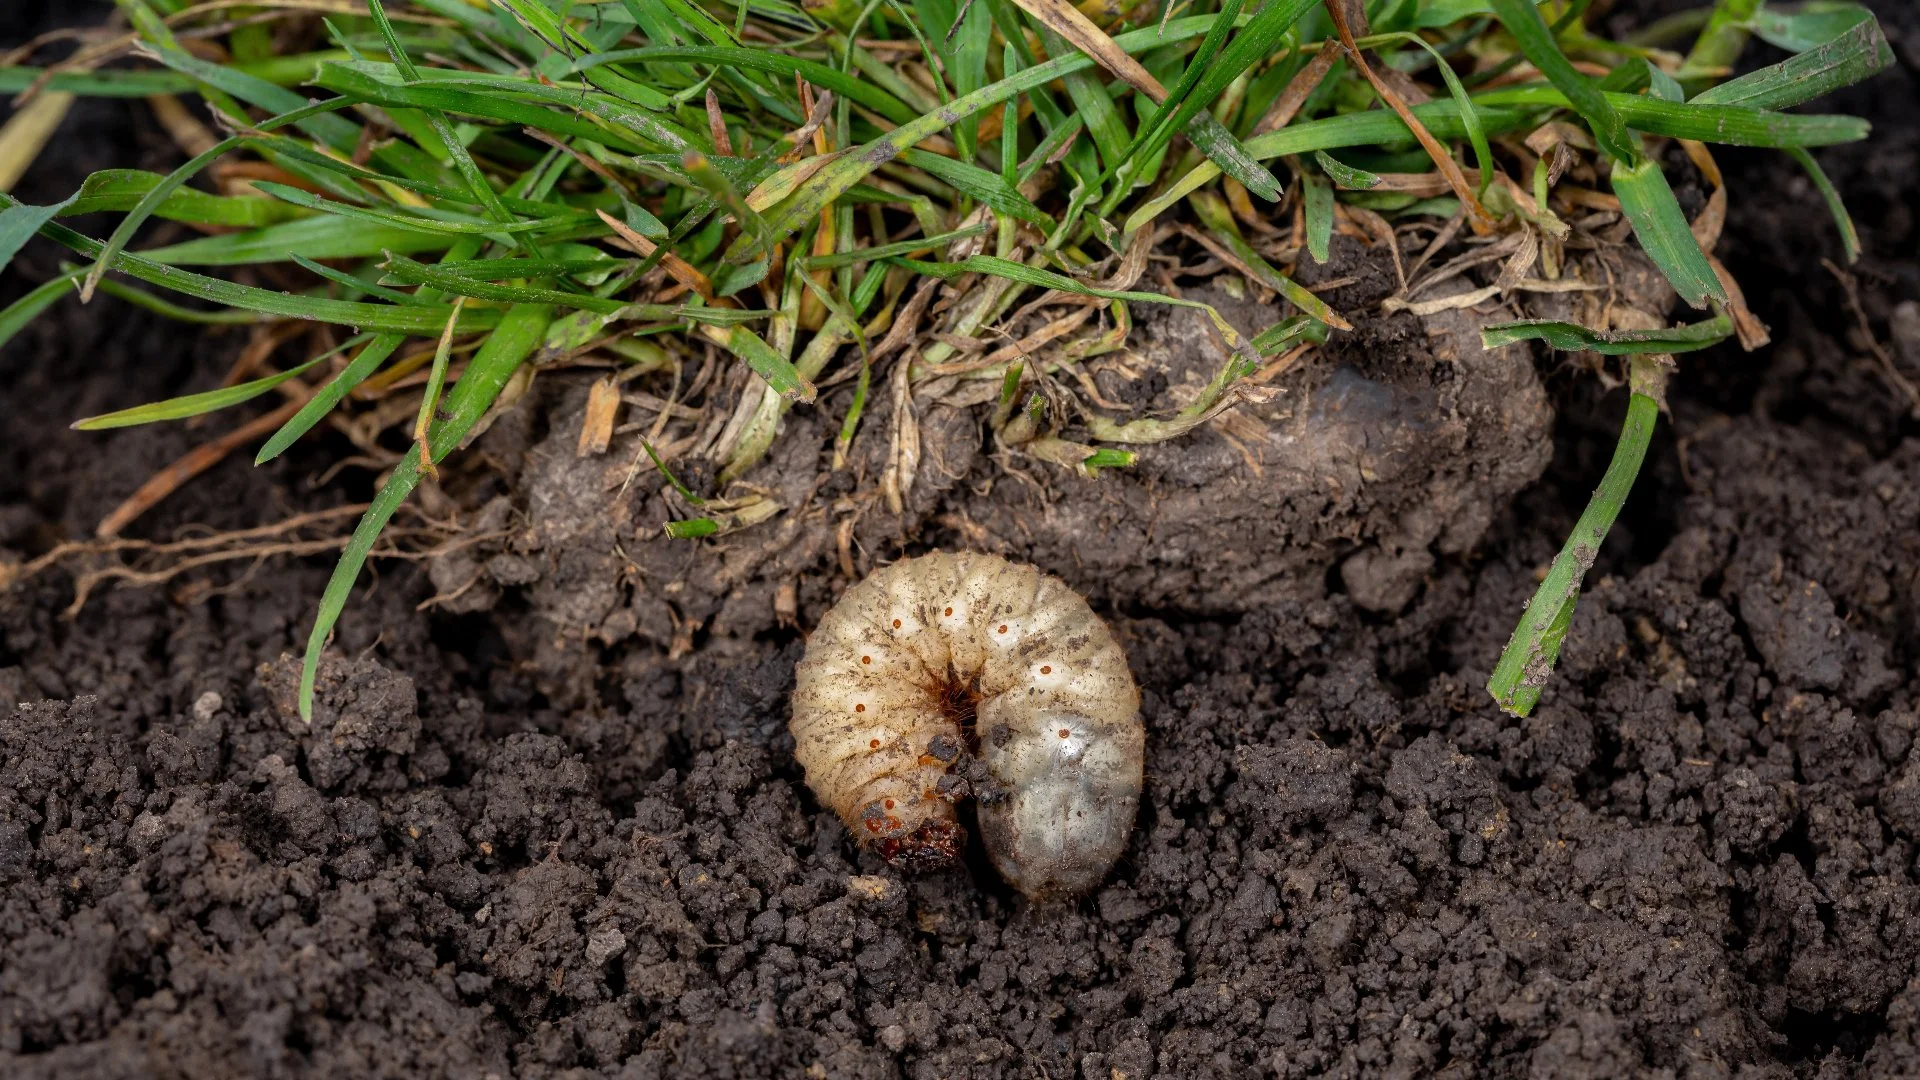 Don't Overlook Grubs - Prevent These Pests to Avoid Damage to Your Lawn